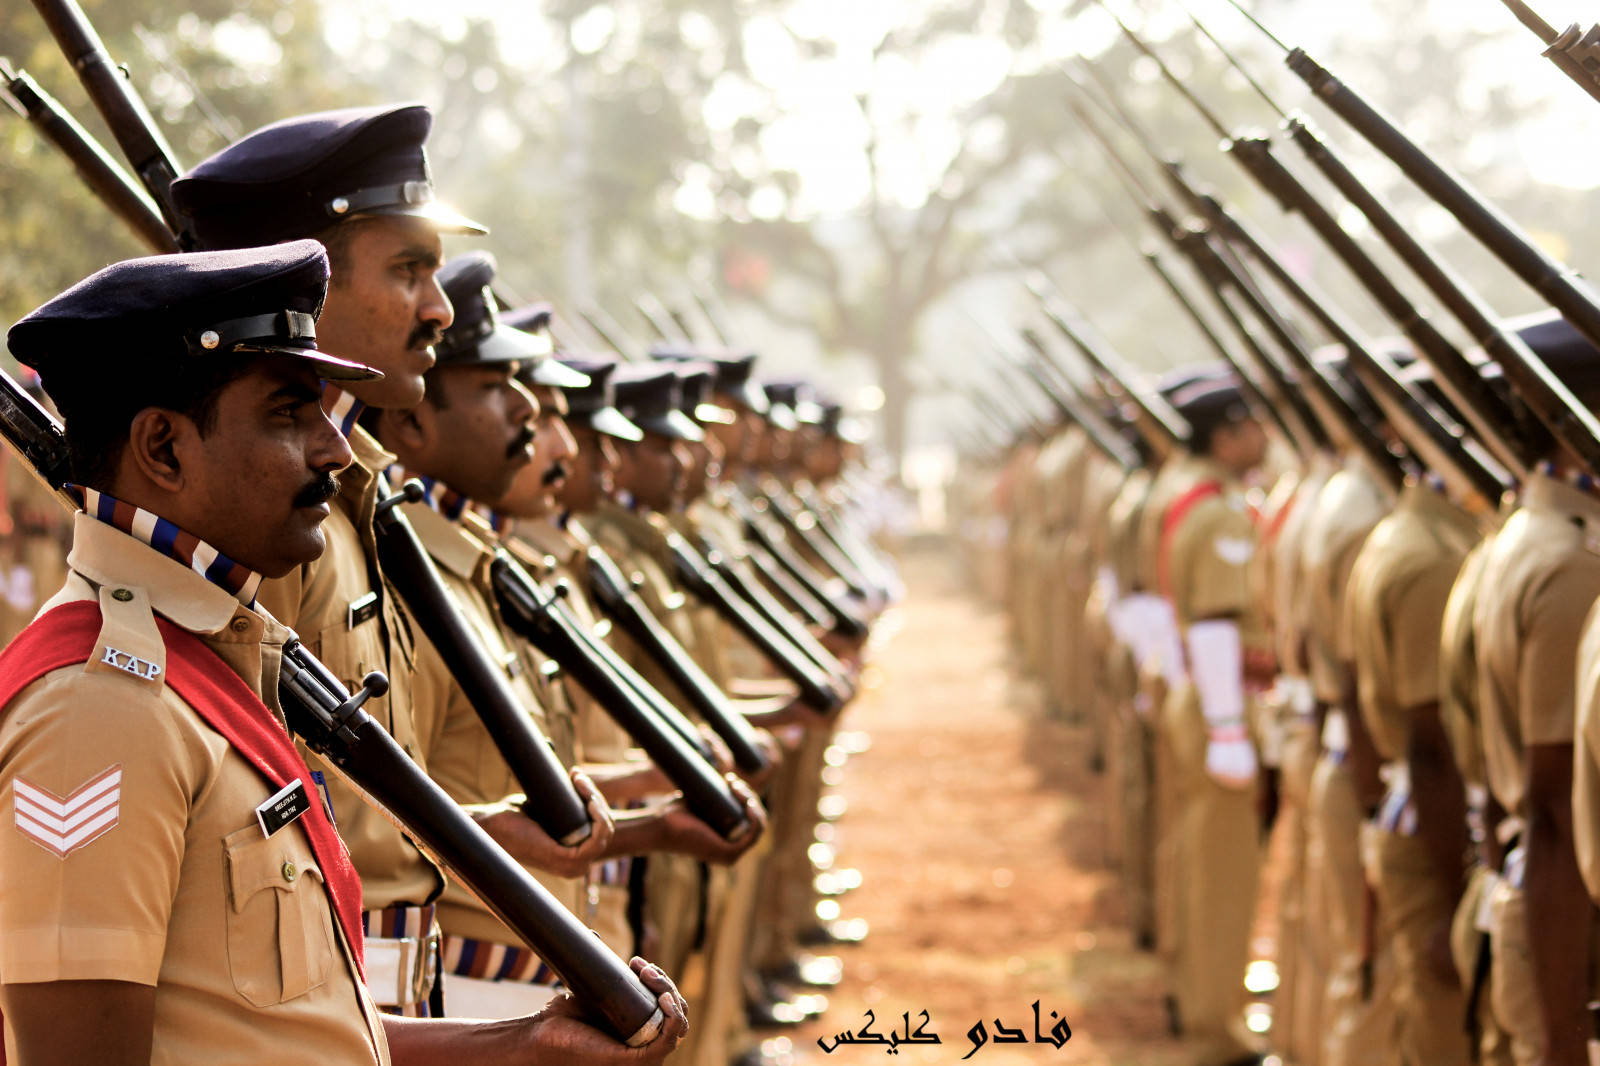 Dedicated Indian Police Forming Ranks